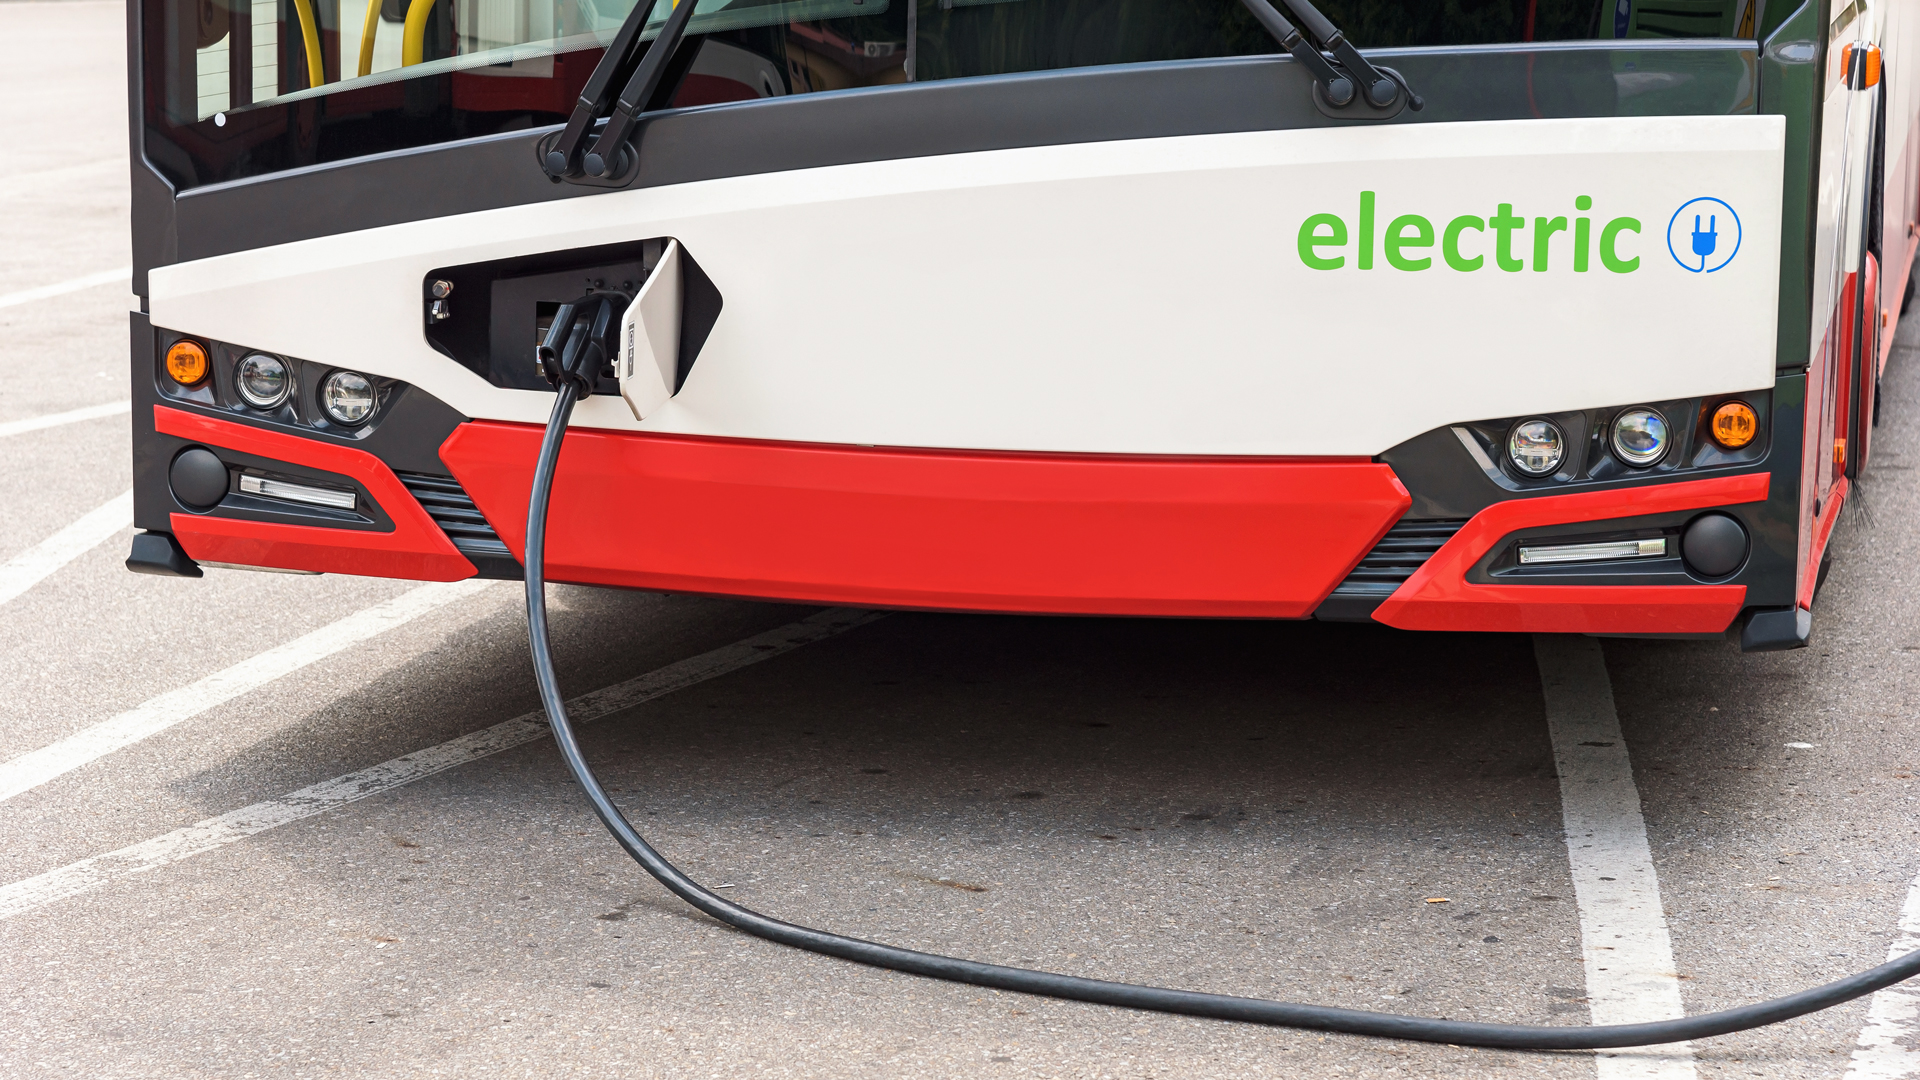 e-mobility and electric charging for commercial vehicles such as trucks, HGVs, LCVs and buses